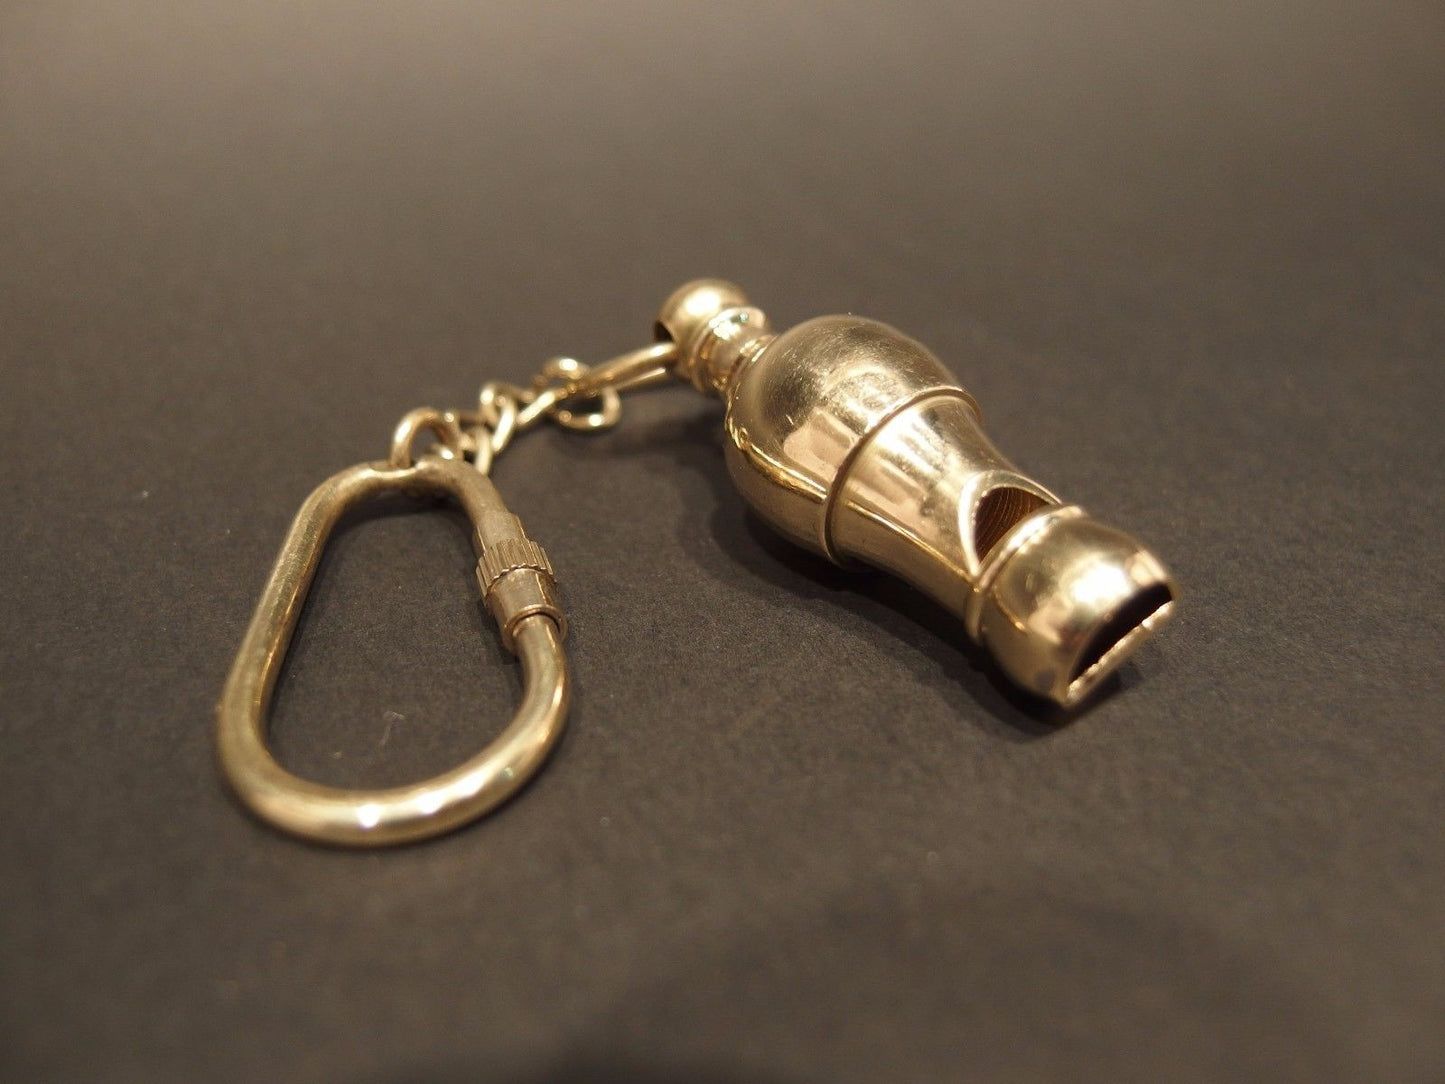 Vintage Antique Victorian Style, Gold Brass Pear Shape Whistle Pendant Key chain - Early Home Decor